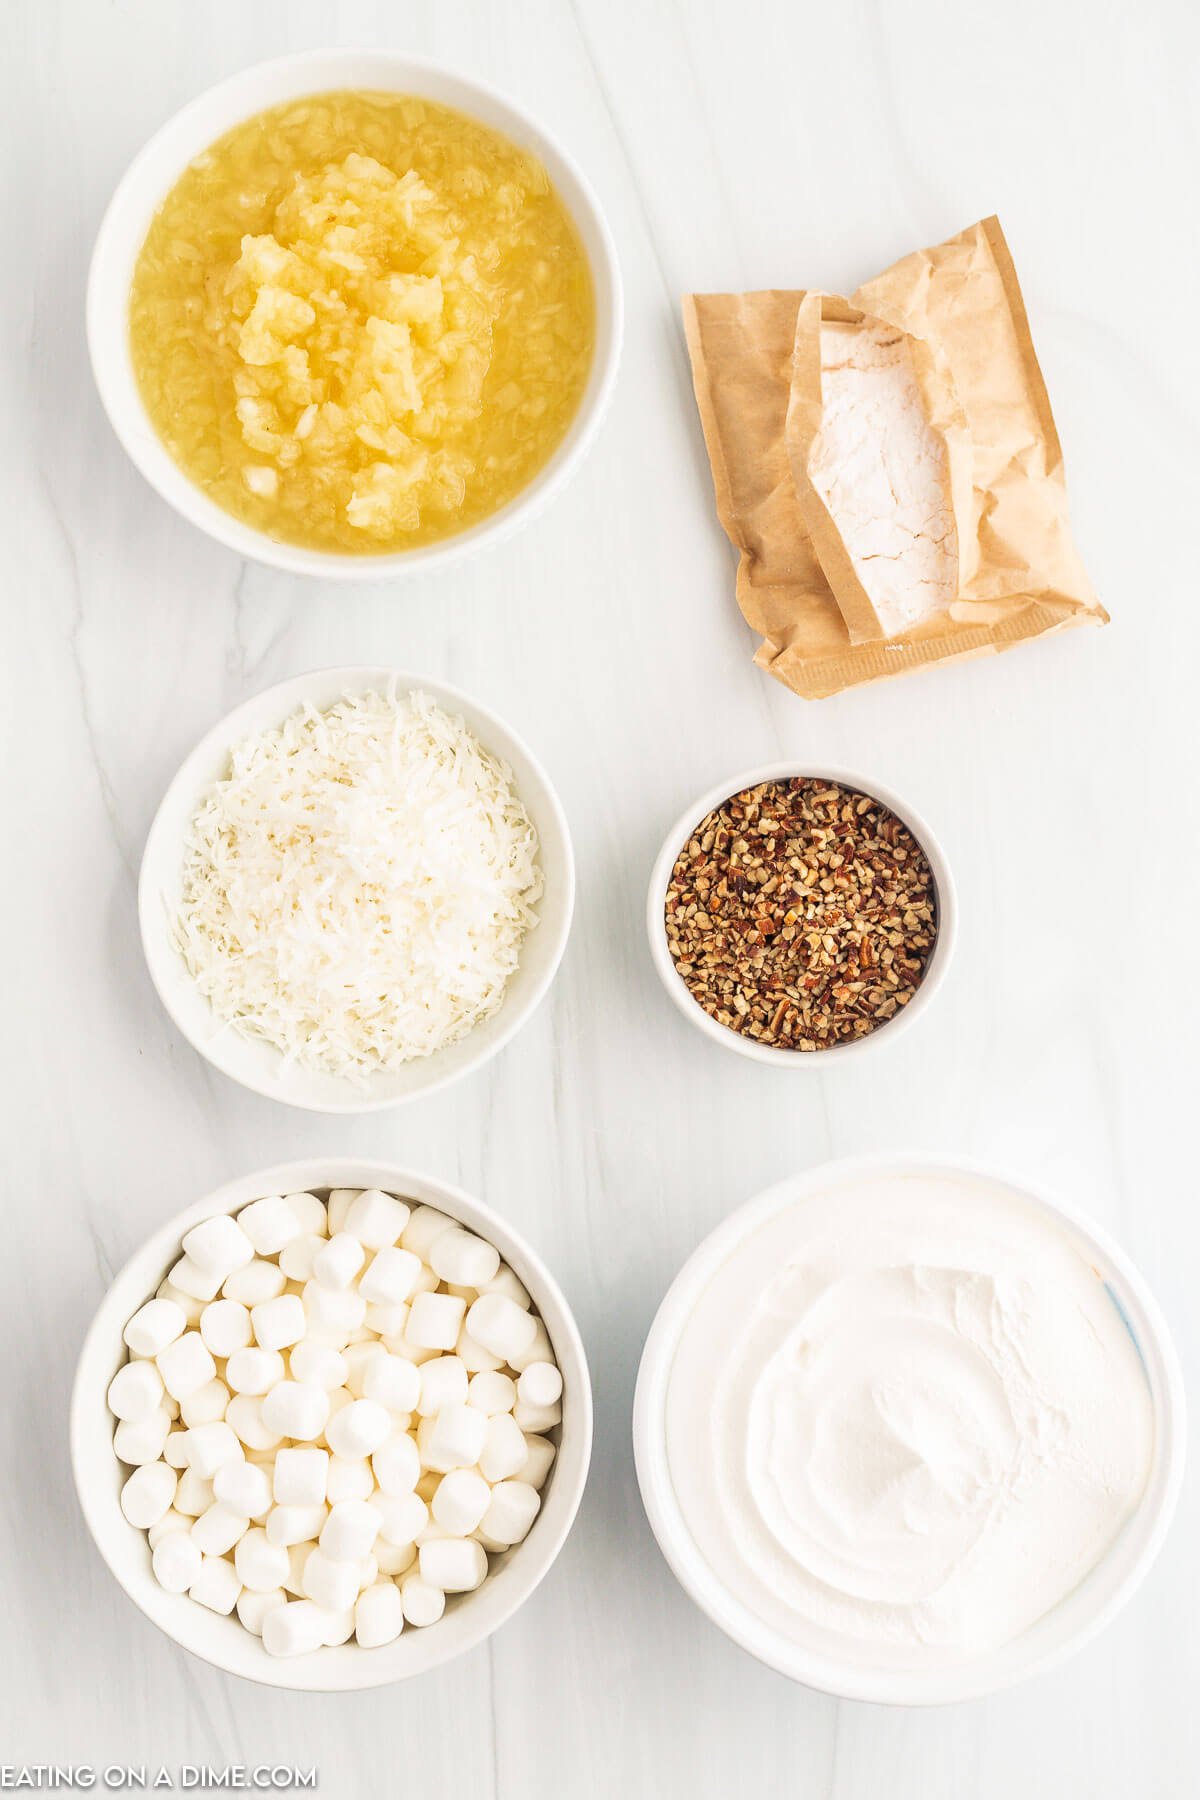 Ingredients needed - vanilla pudding mix, crushed pineapple, whipped topping, mini marshmallows, coconut, pecans